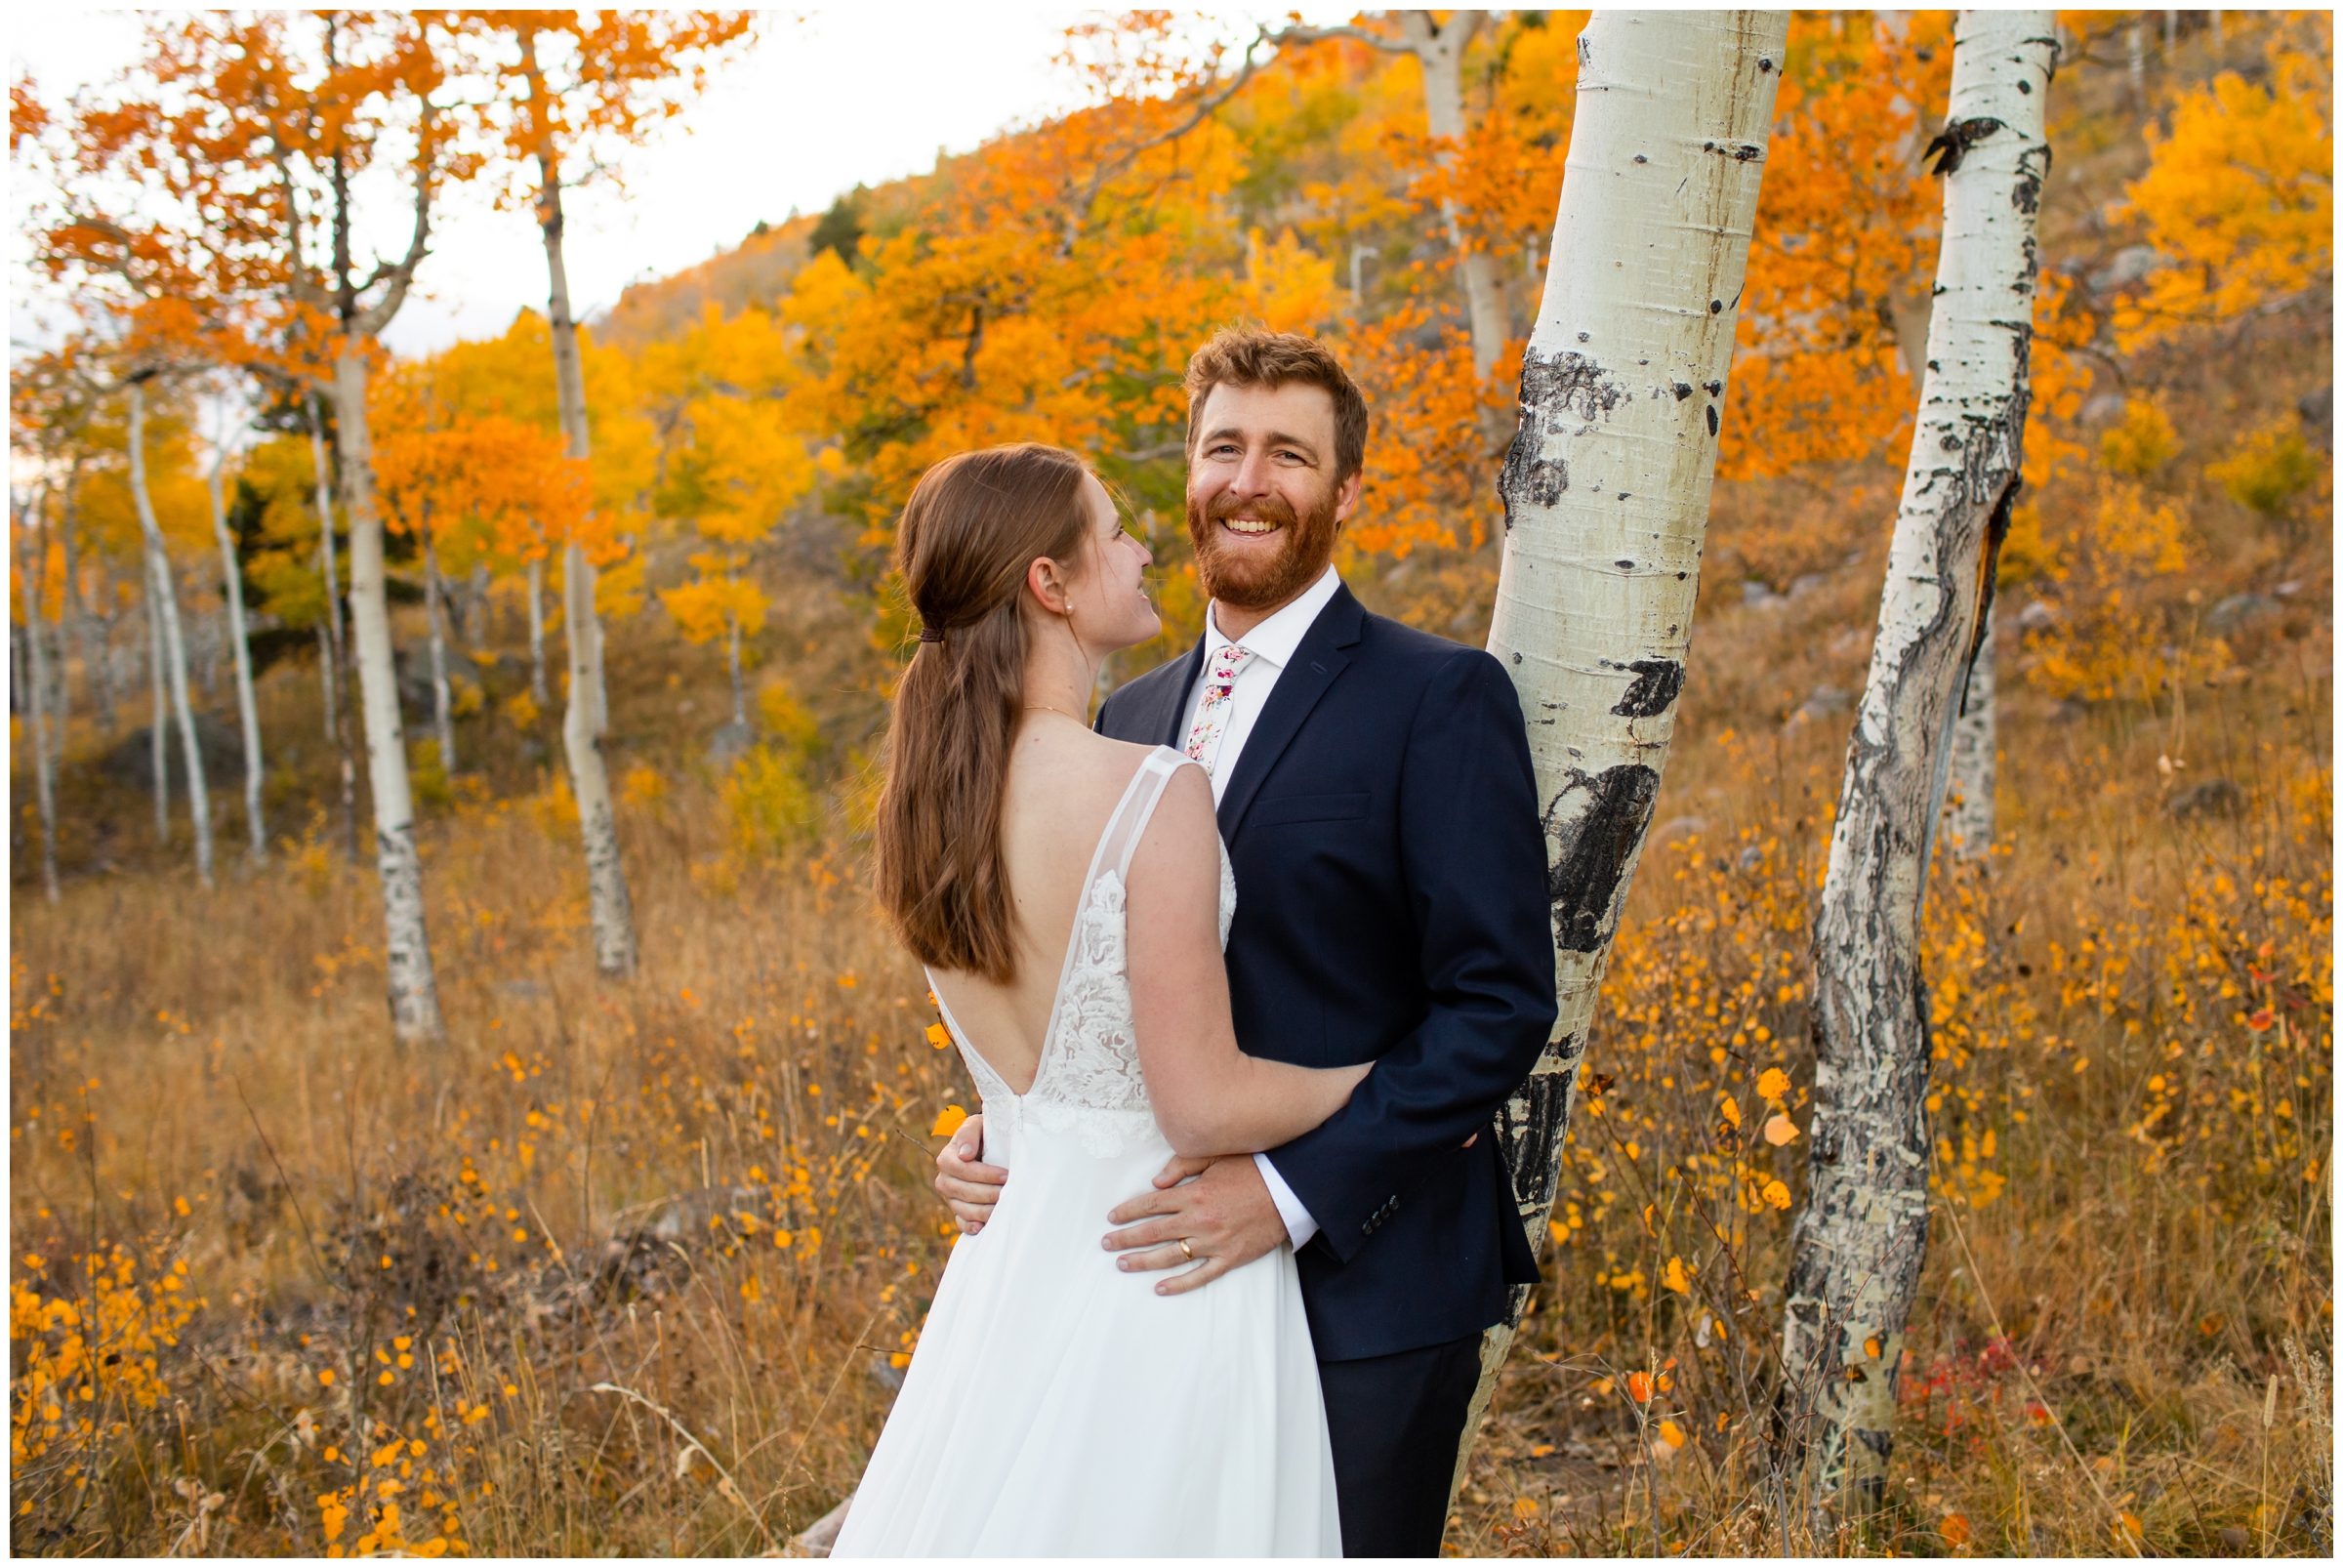 fall elopement wedding inspiration in the colorado mountains 